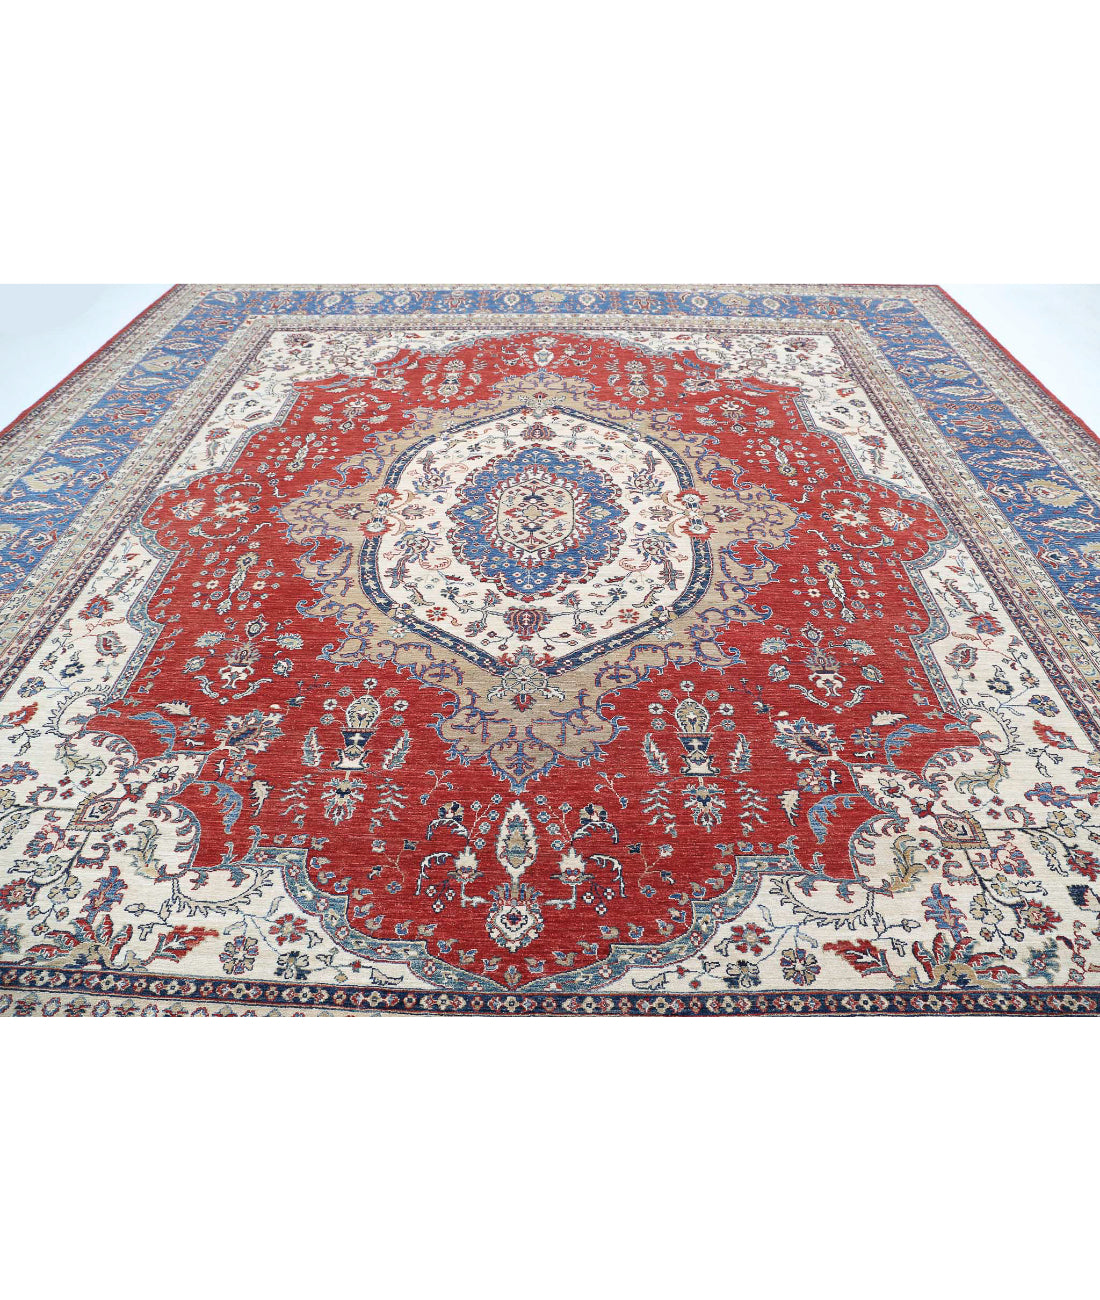 Hand Knotted Heriz Wool Rug - 14'2'' x 15'2'' 14'2'' x 15'2'' (425 X 455) / Red / Blue